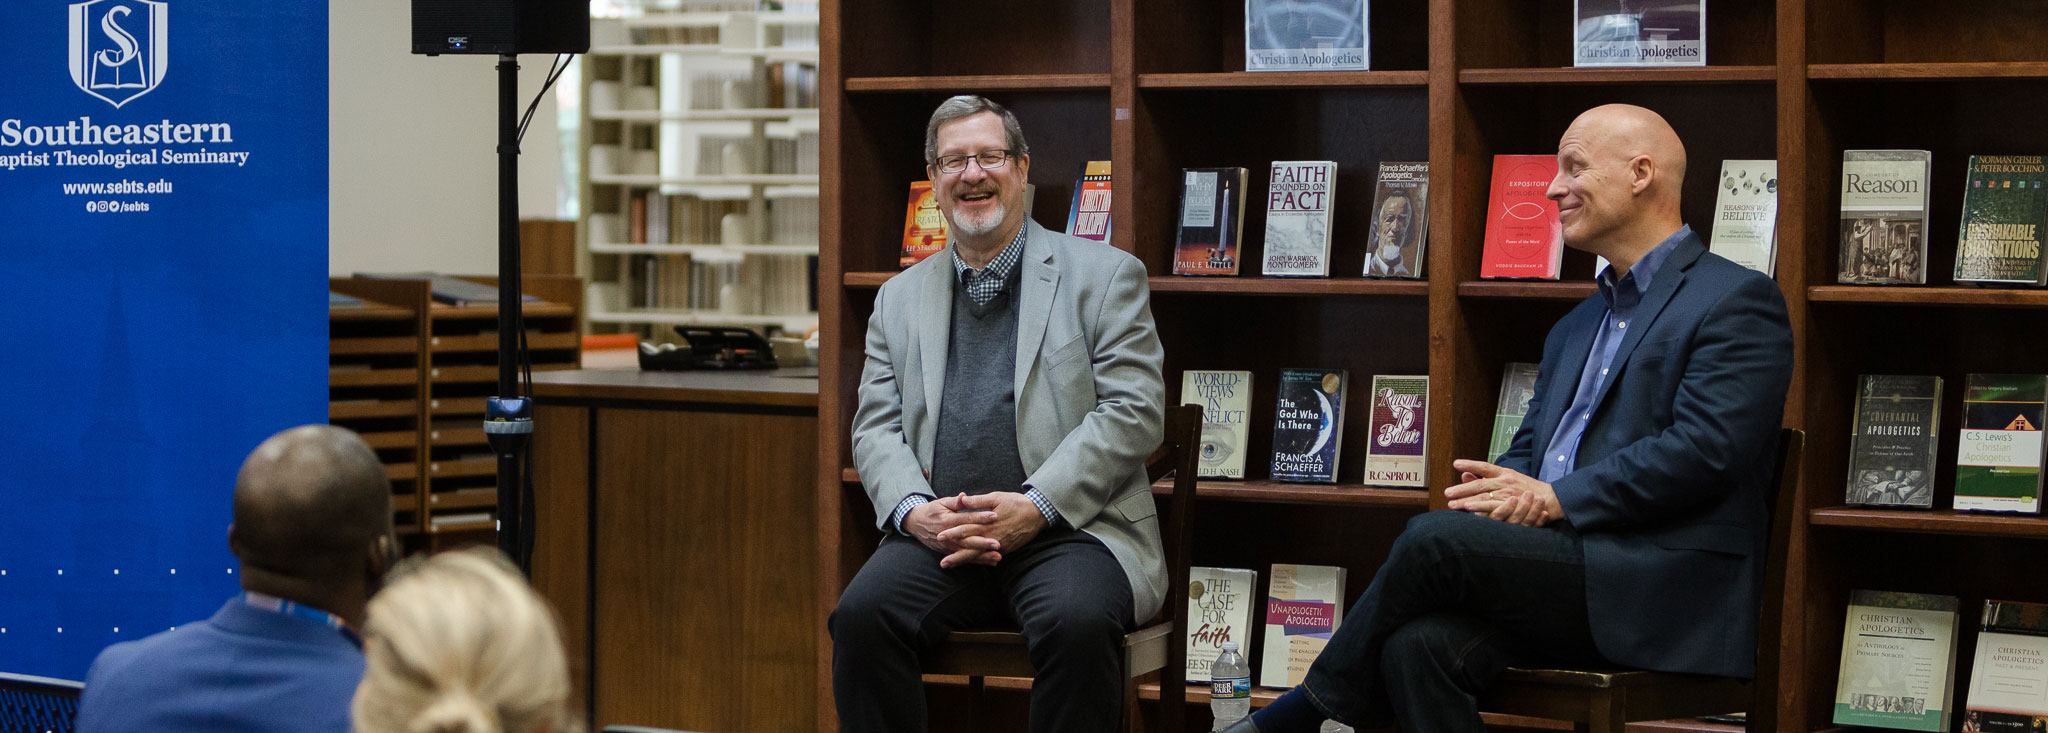 Author and apologist Lee Strobel addresses students during Page Lecture  Series - Southeastern Baptist Theological Seminary